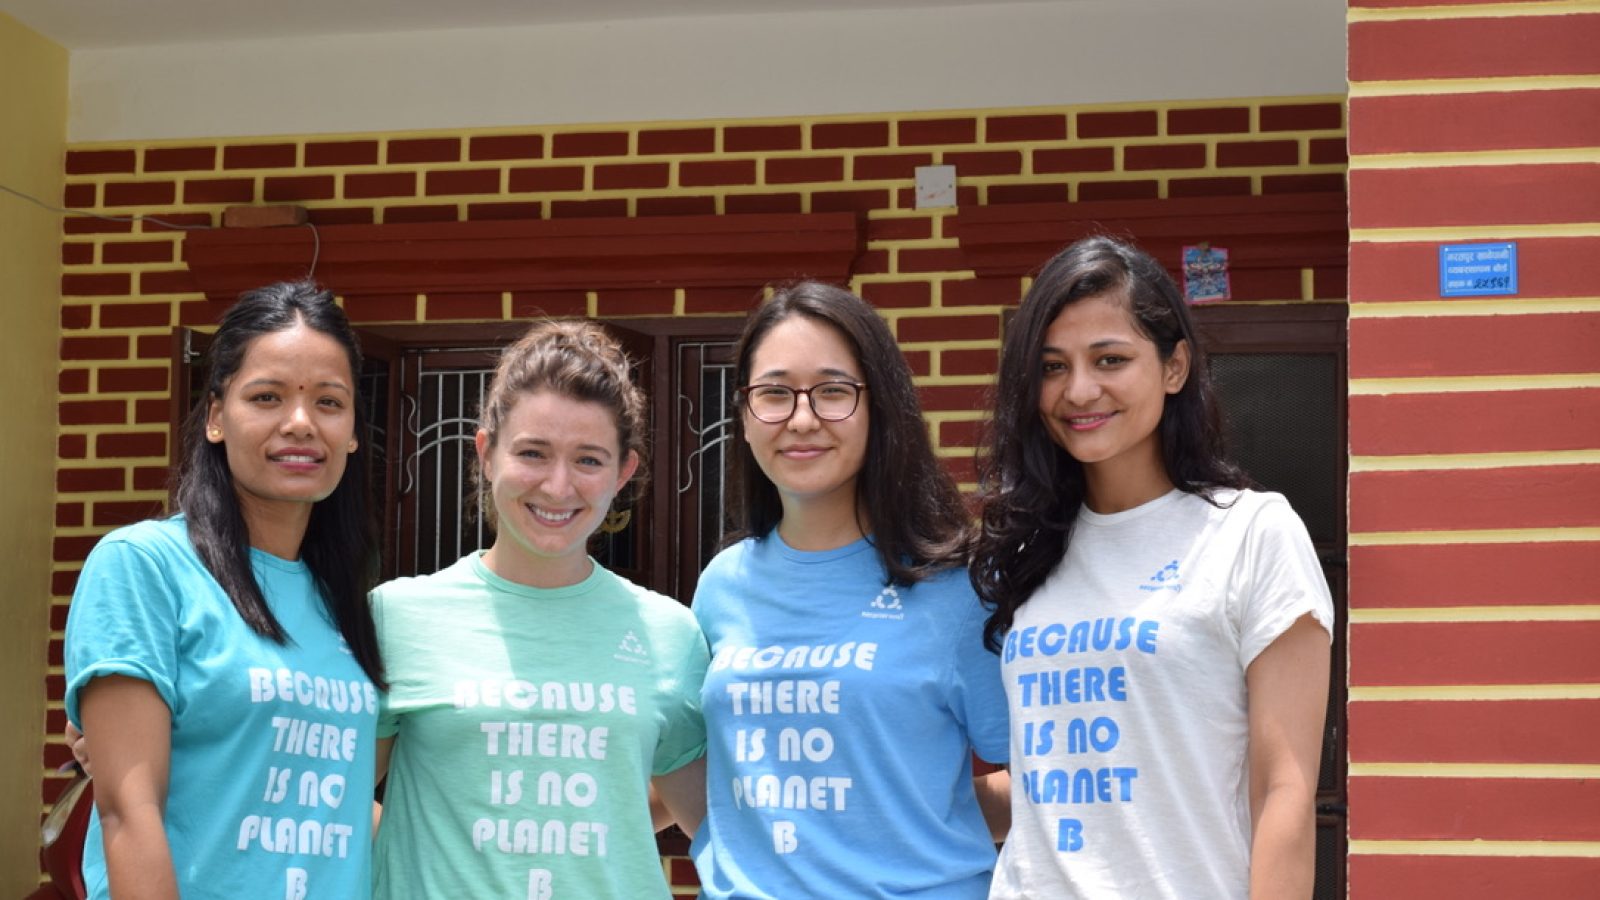 Four women standing together wearing shirts that say &quot;Because there is no Planet B&quot;